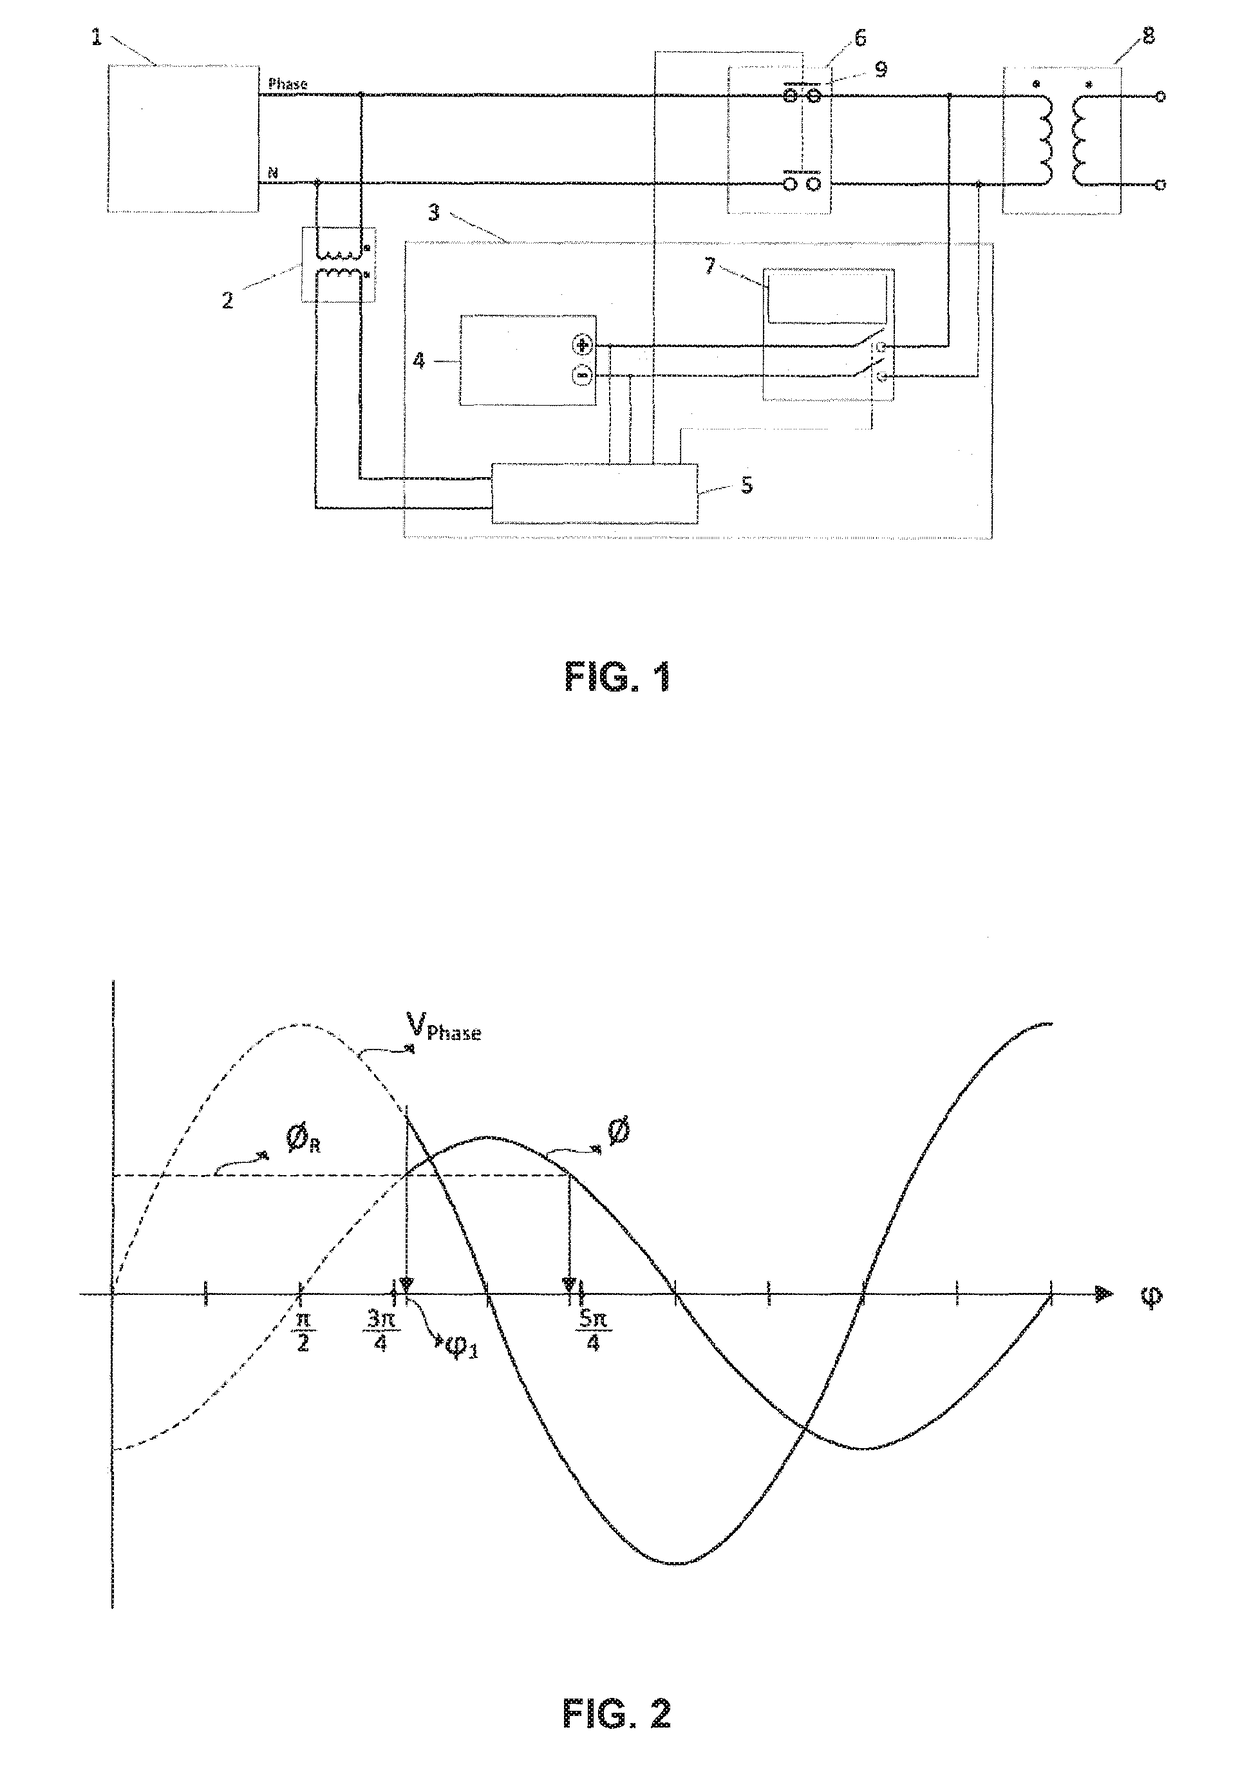 Method for reducing the inrush current of an inductive load